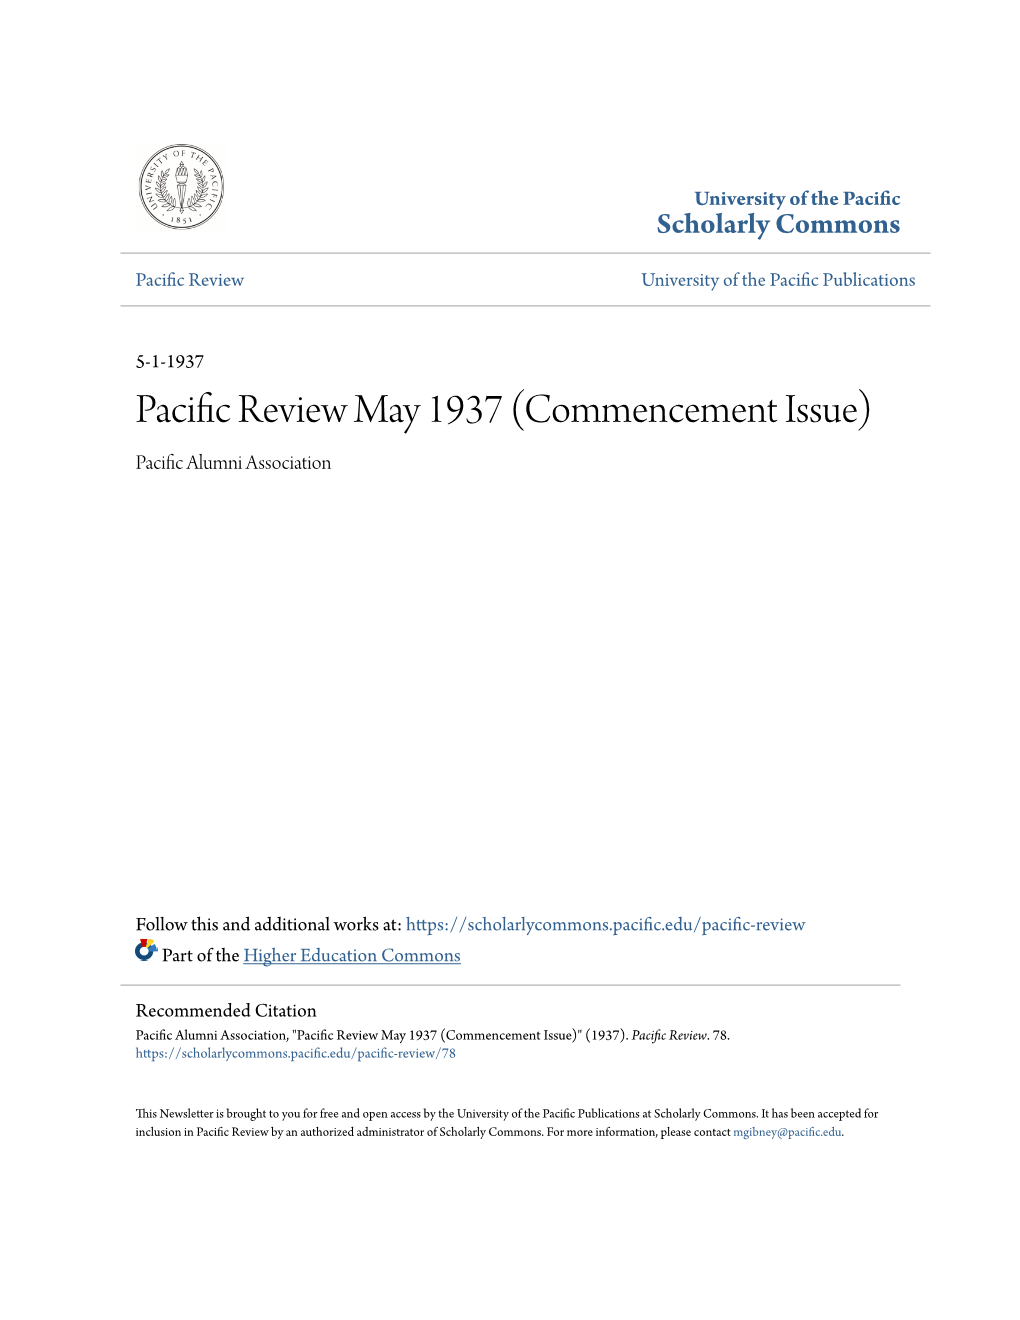 Pacific Review May 1937 (Commencement Issue) Pacific Alumni Association